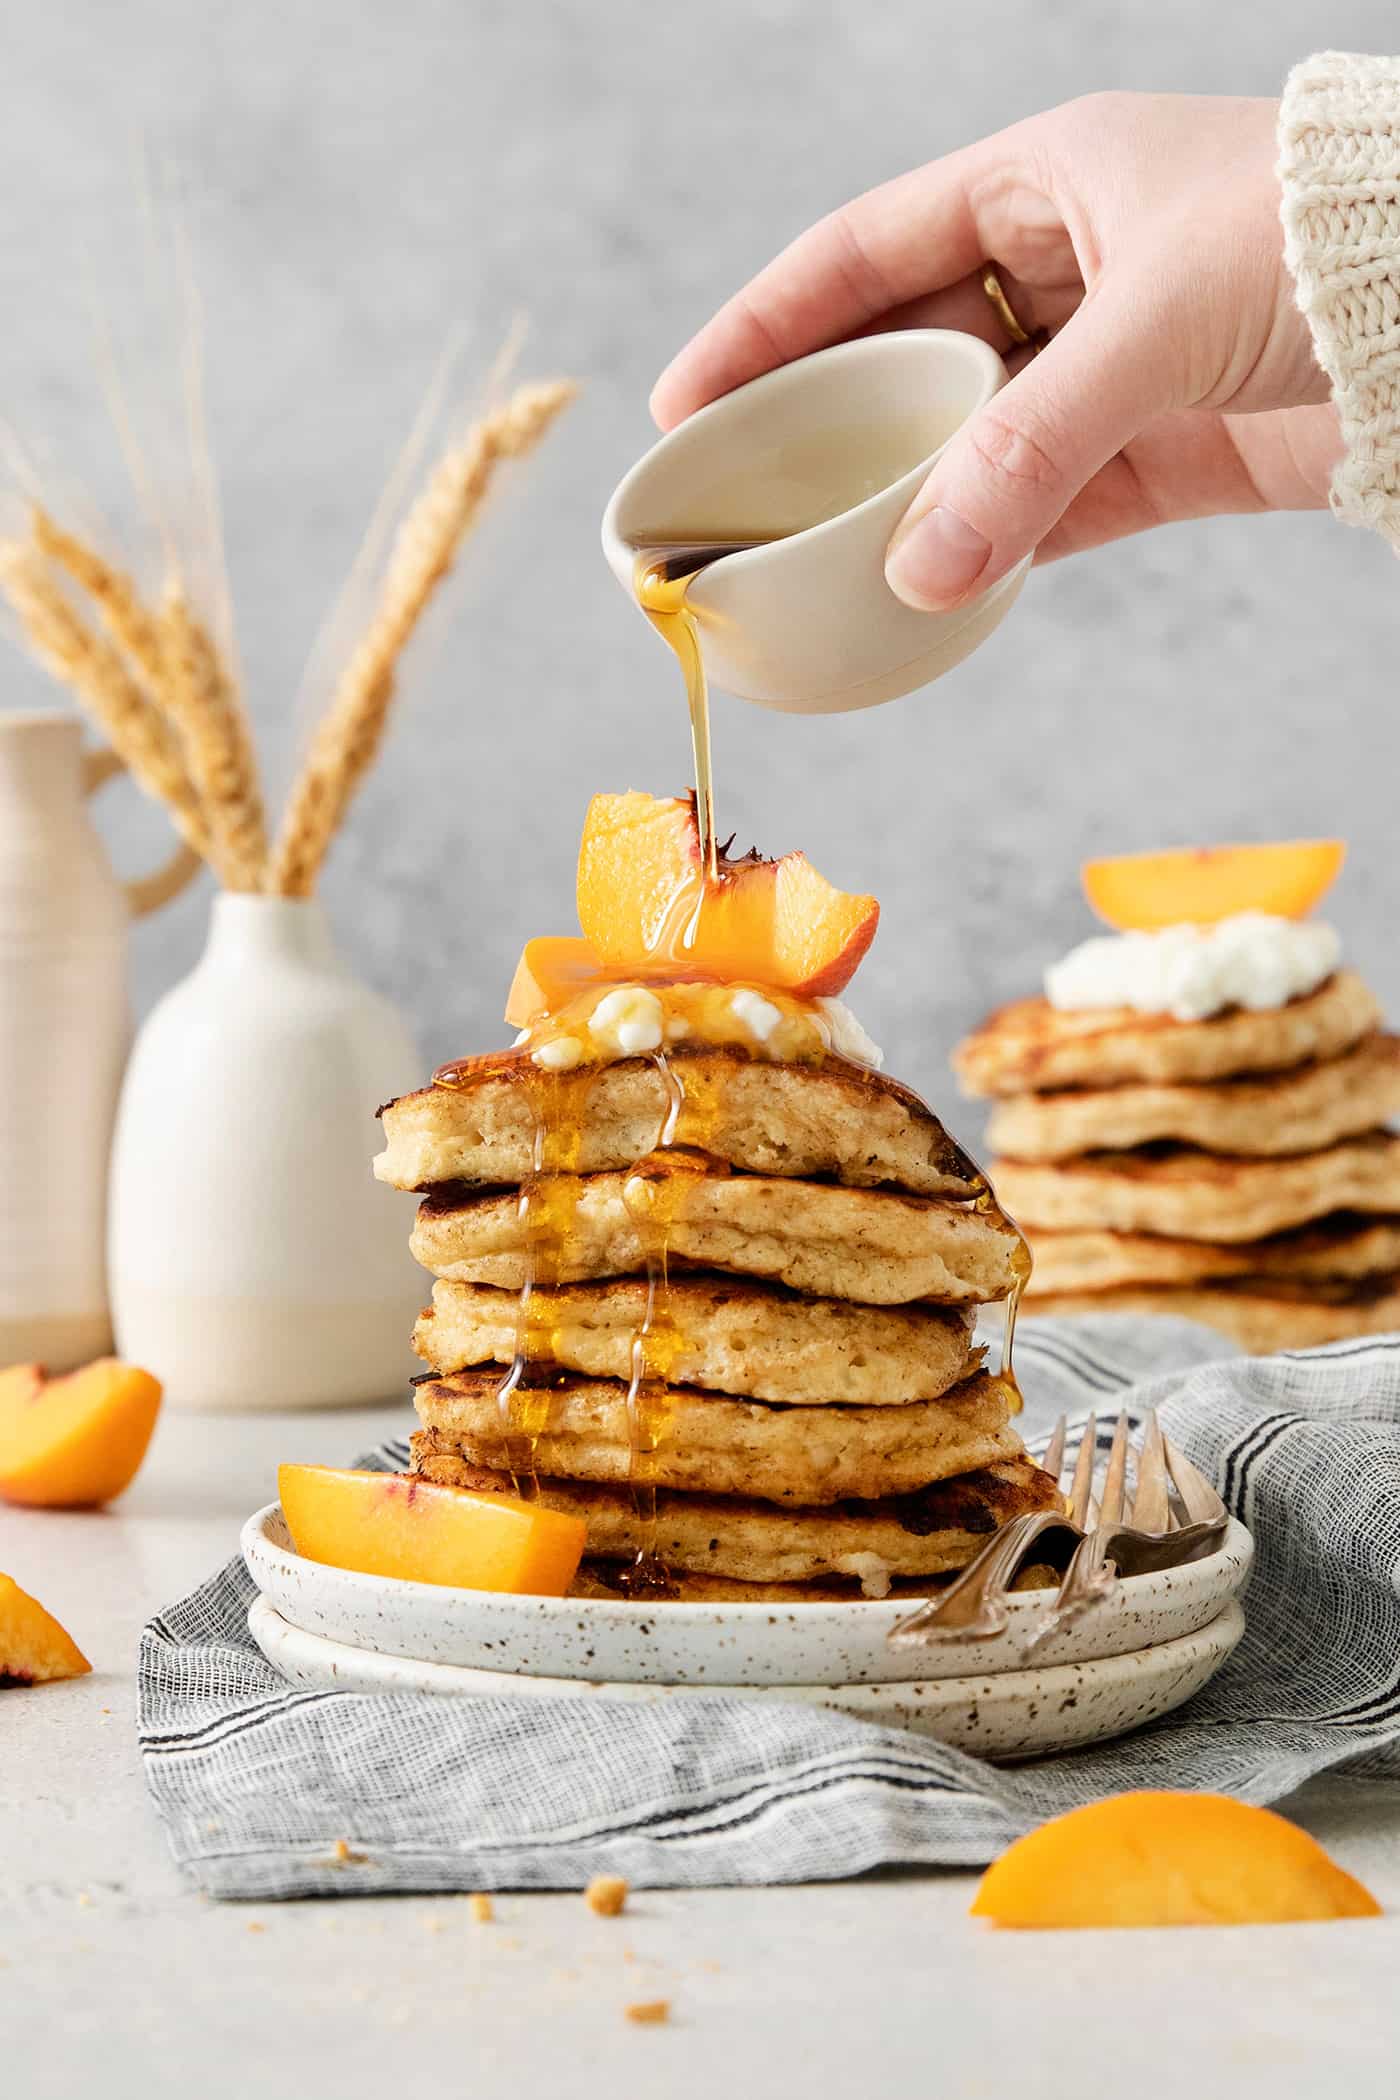 A hand drizzles maple syrup from a small white pitcher over a stack of cottage cheese pancakes.